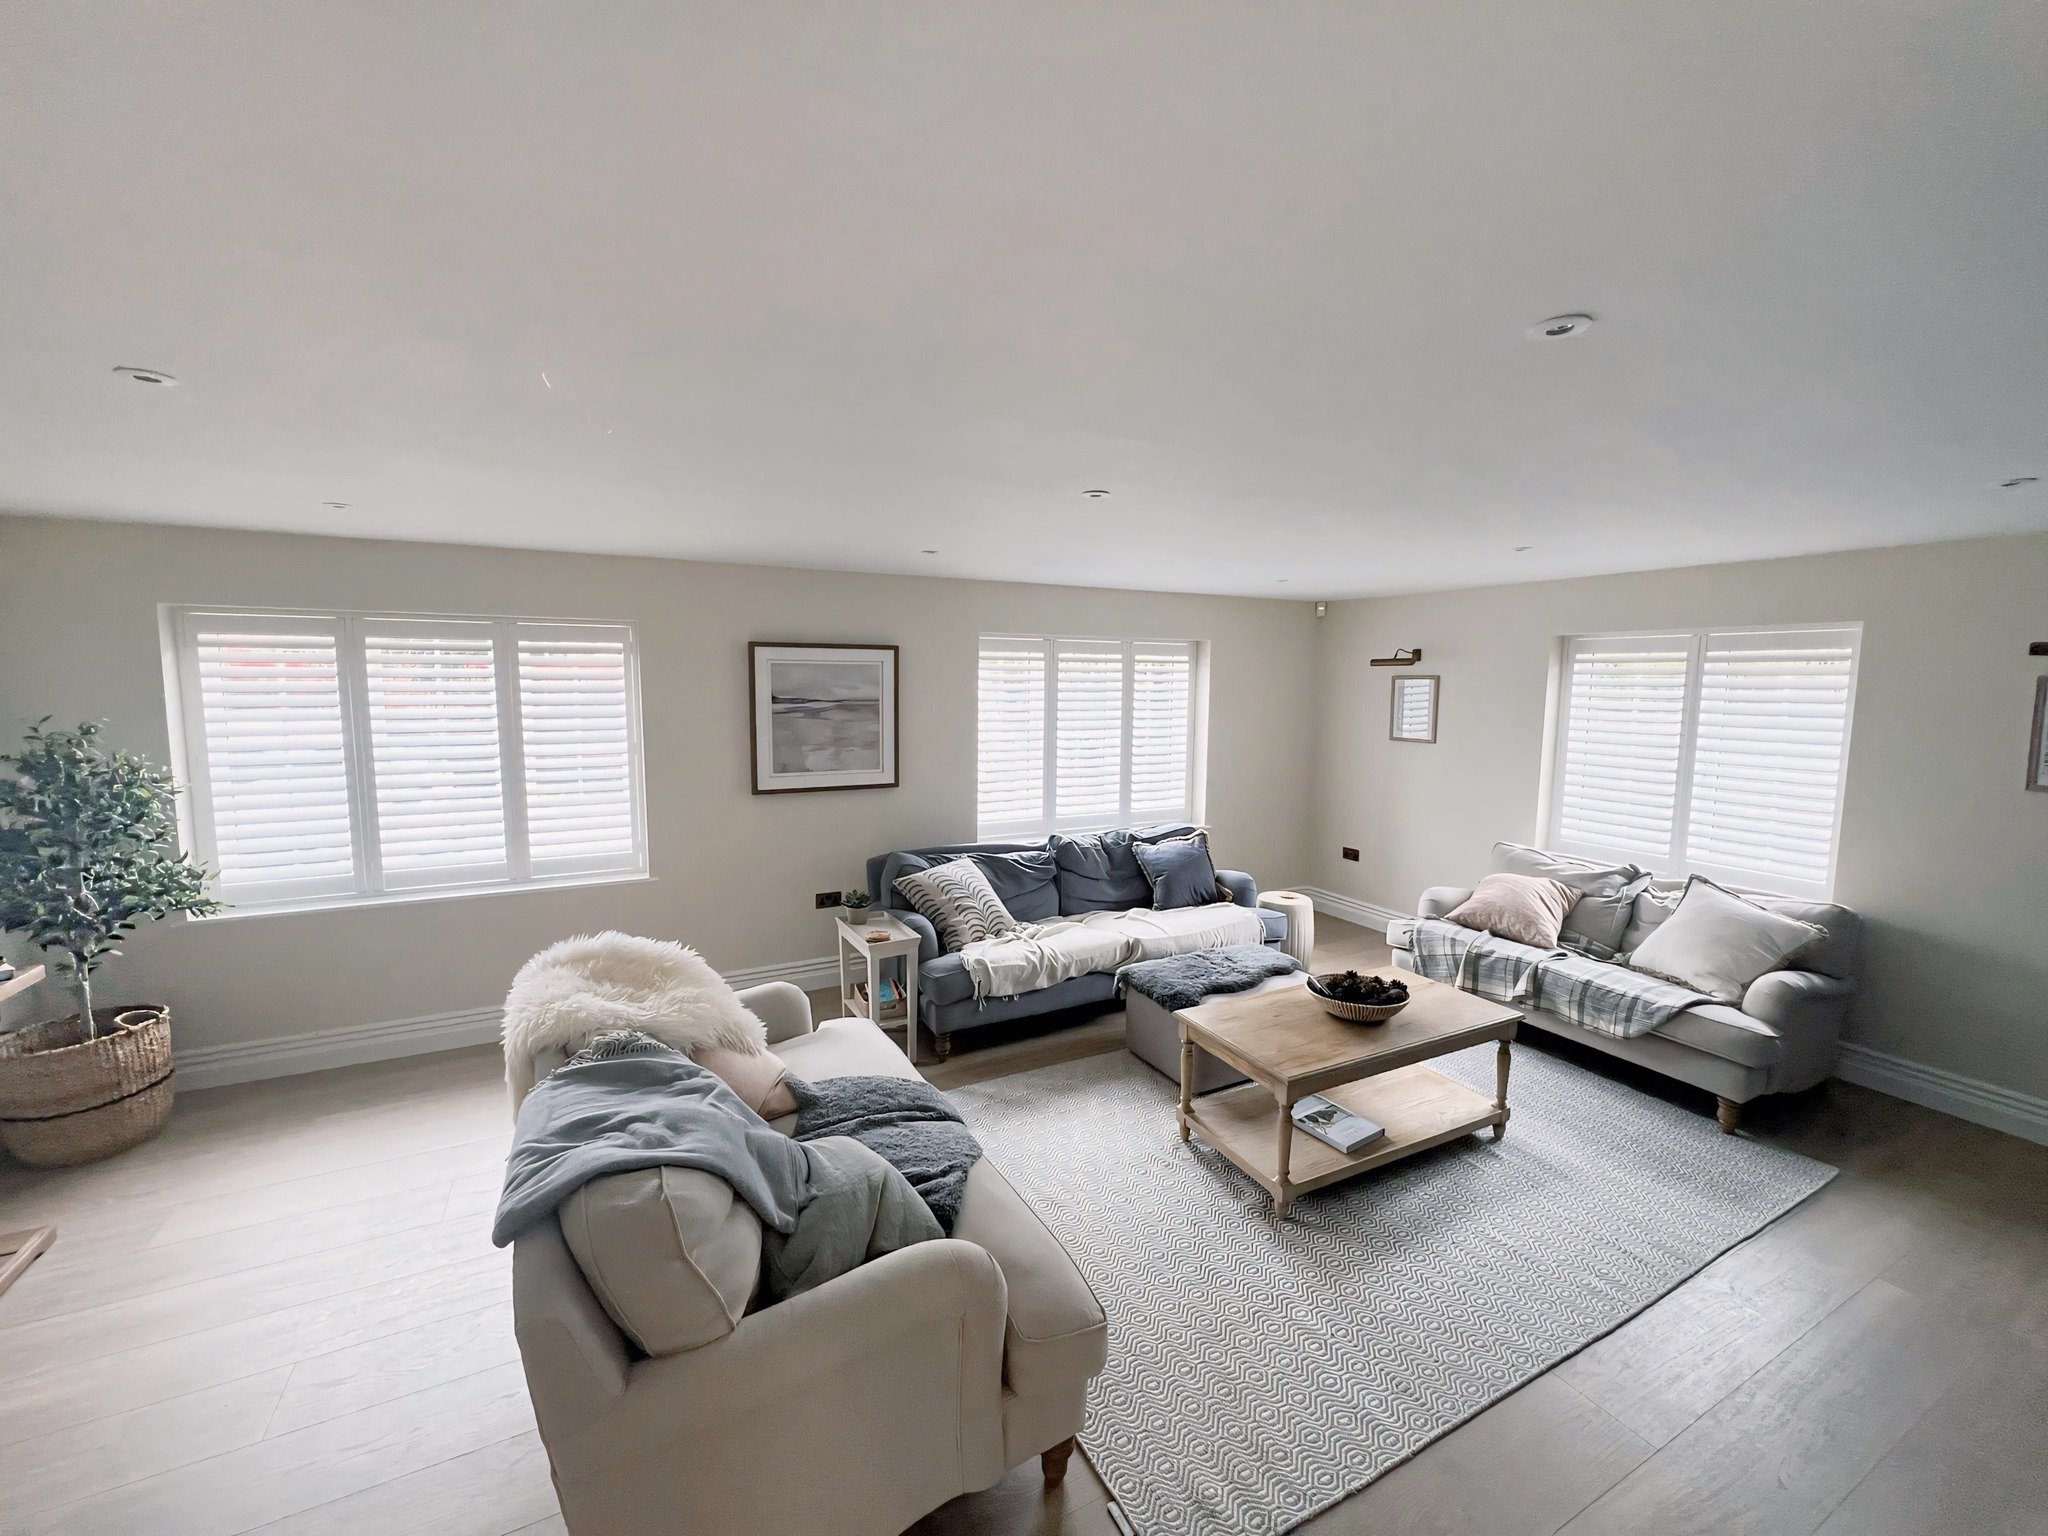 Brighten Up Your Home With Our Stunning Full Height Shutters in Pure White! Just take a Look At This Recent Installation Across All Three Windows ! Not Only Do These Shutters Add a Touch of Elegance, but They Also Flood The Room with Natural Light, C